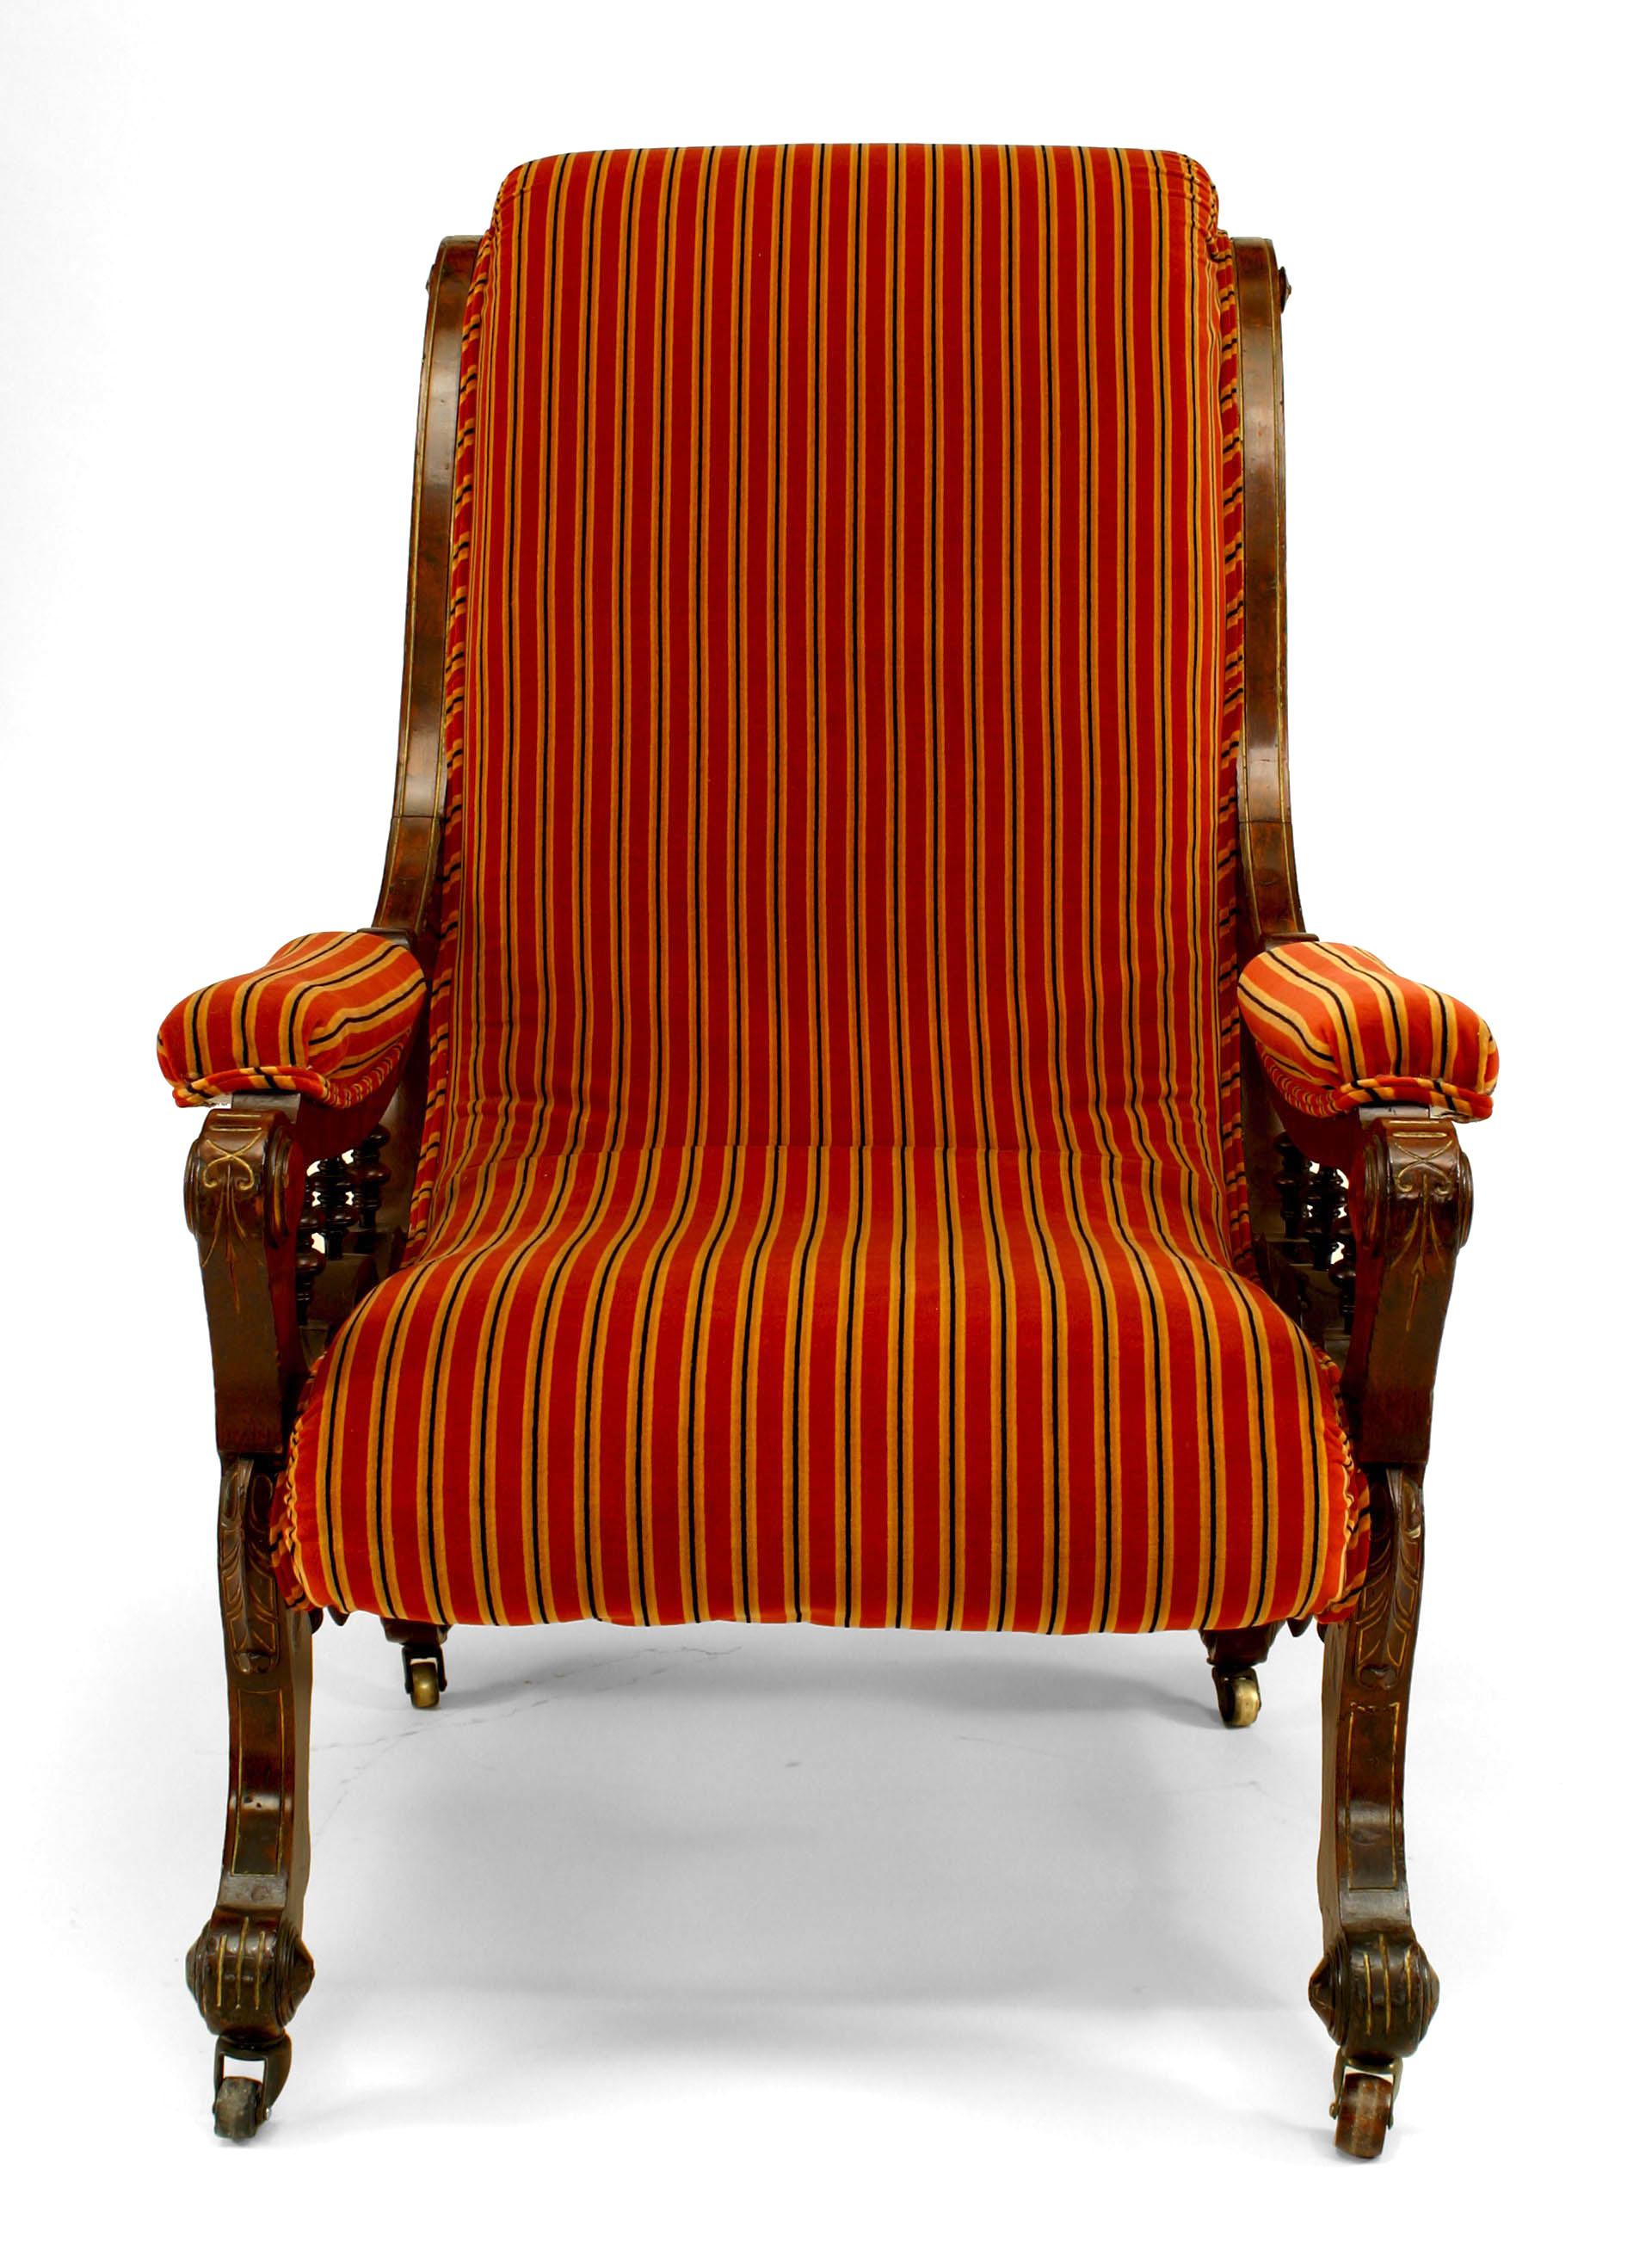 American Victorian Eastlake-style burl walnut and gilt trimmed sleigh back armchair with striped rust colored upholstery. (Signed: HOSTATTER, Pat Pending, 4/3/1877)
